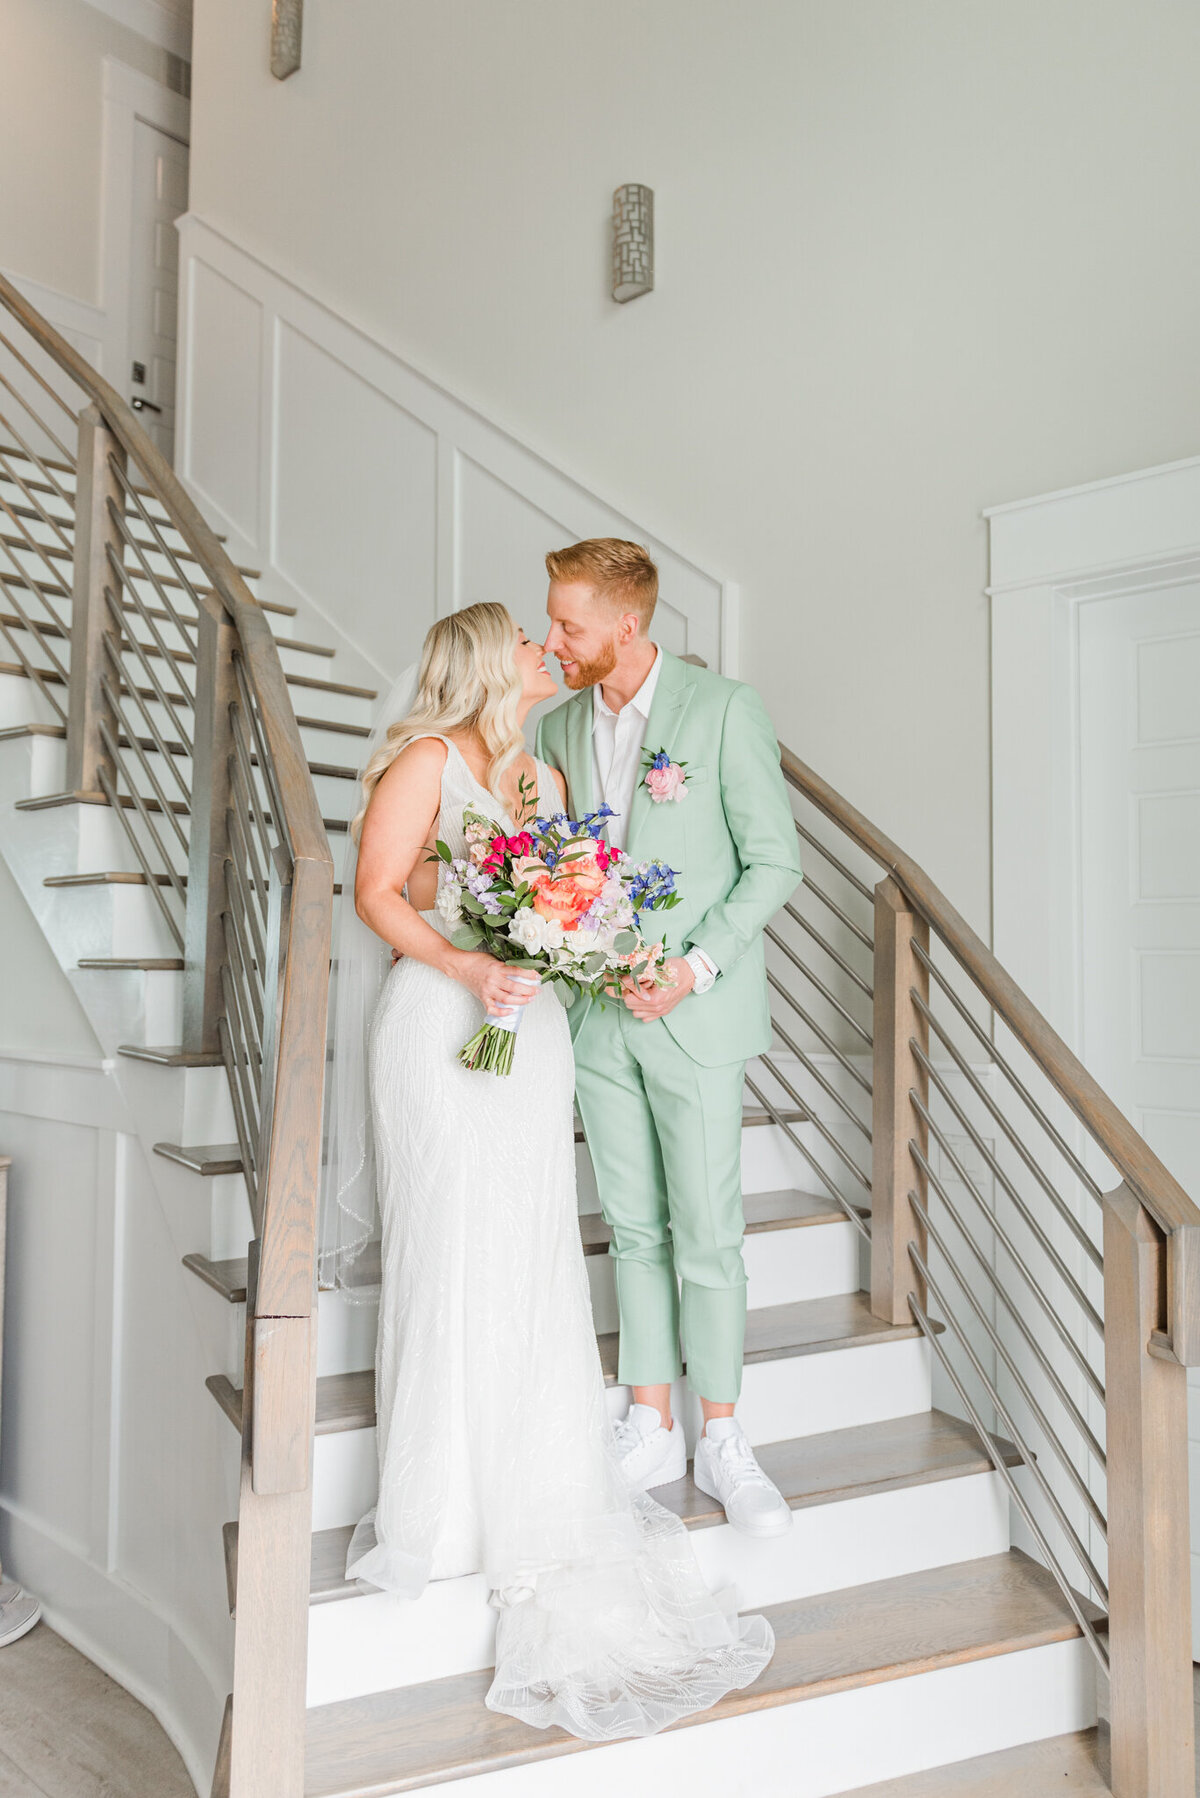 Bride and Groom kissing on stairs during their wedding in wrigthsville beach, nc